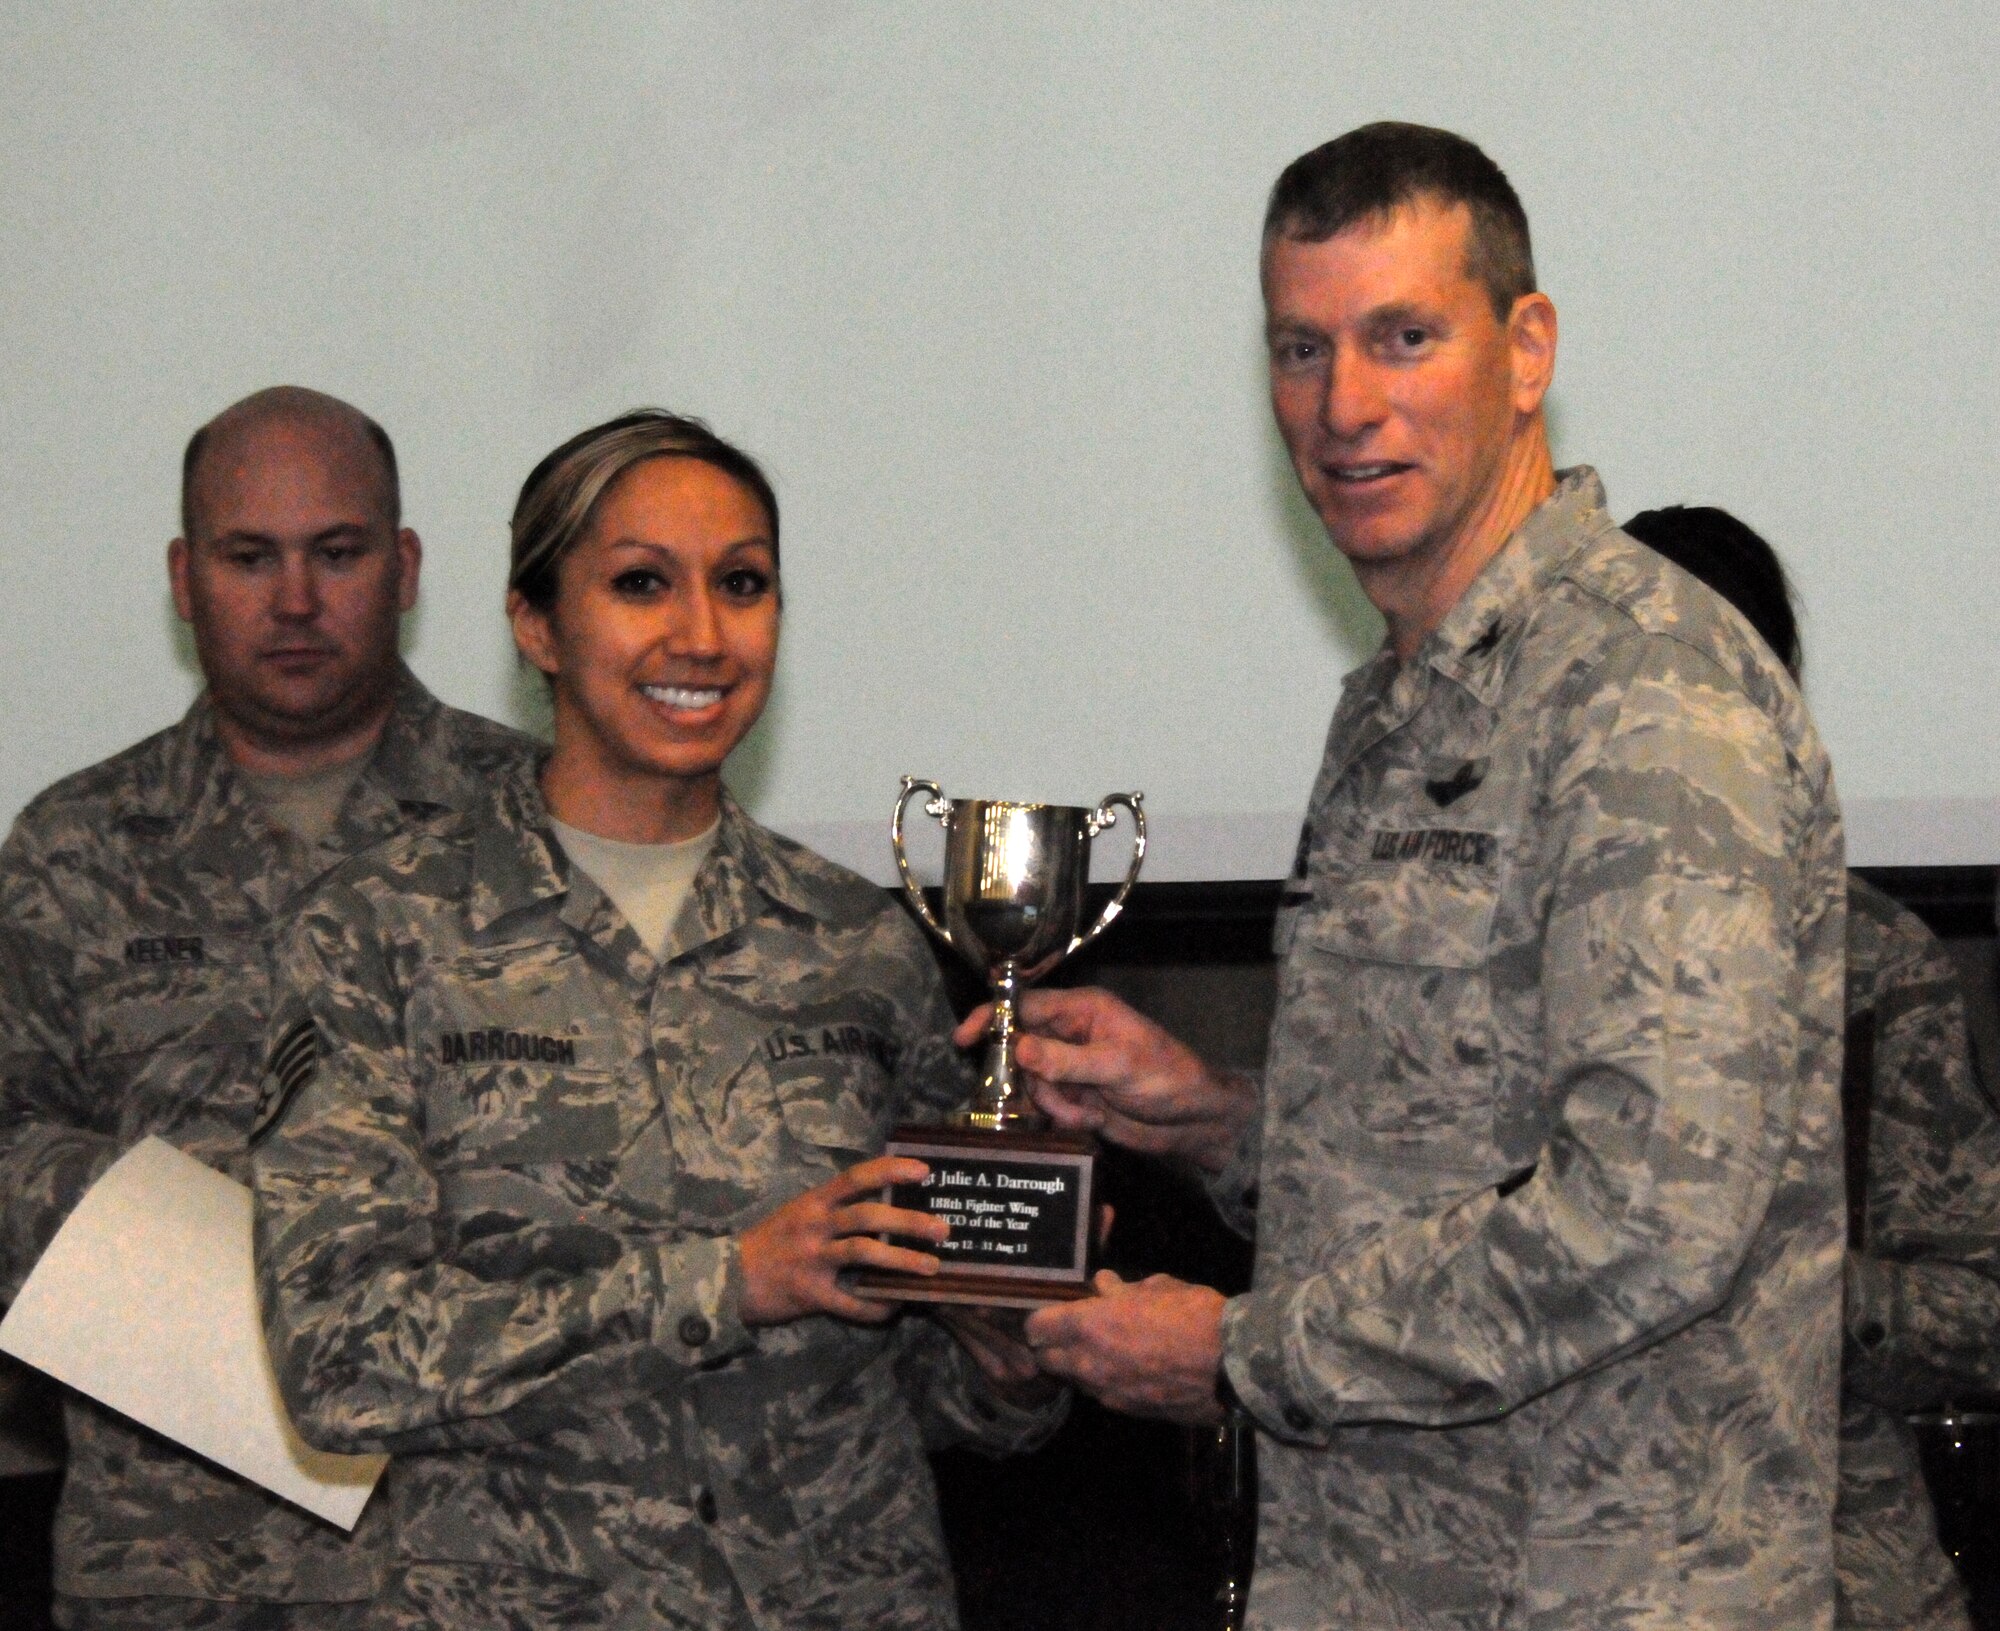 Col. Mark Anderson, 188th Fighter Wing commander, right, presents the 188th Outstanding Noncommissioned Officer of the Year award to Staff Sgt. Julie Darrough of the 188th Communications Flight during a commander’s call presentation Feb. 8, 2014. (U.S. Air National Guard photo by Airman 1st Class Cody Martin)